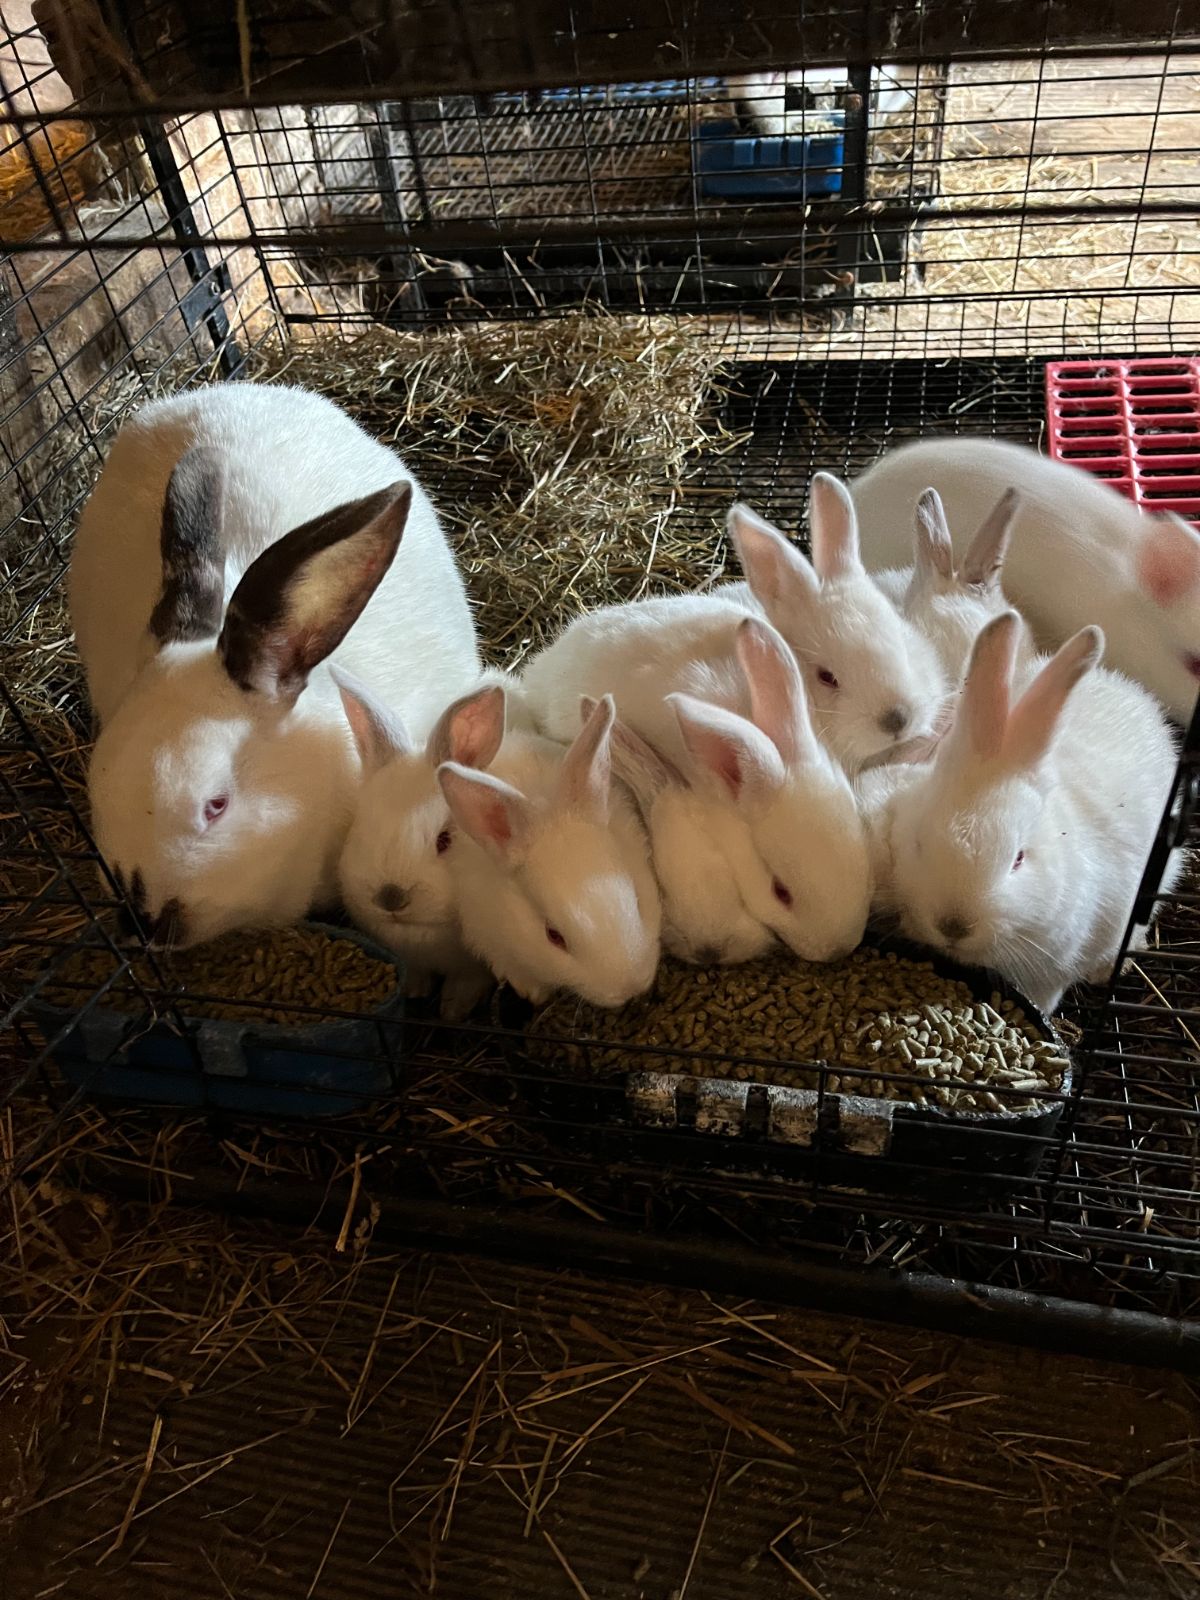 A doe (mother) rabbit and her litter of young kits